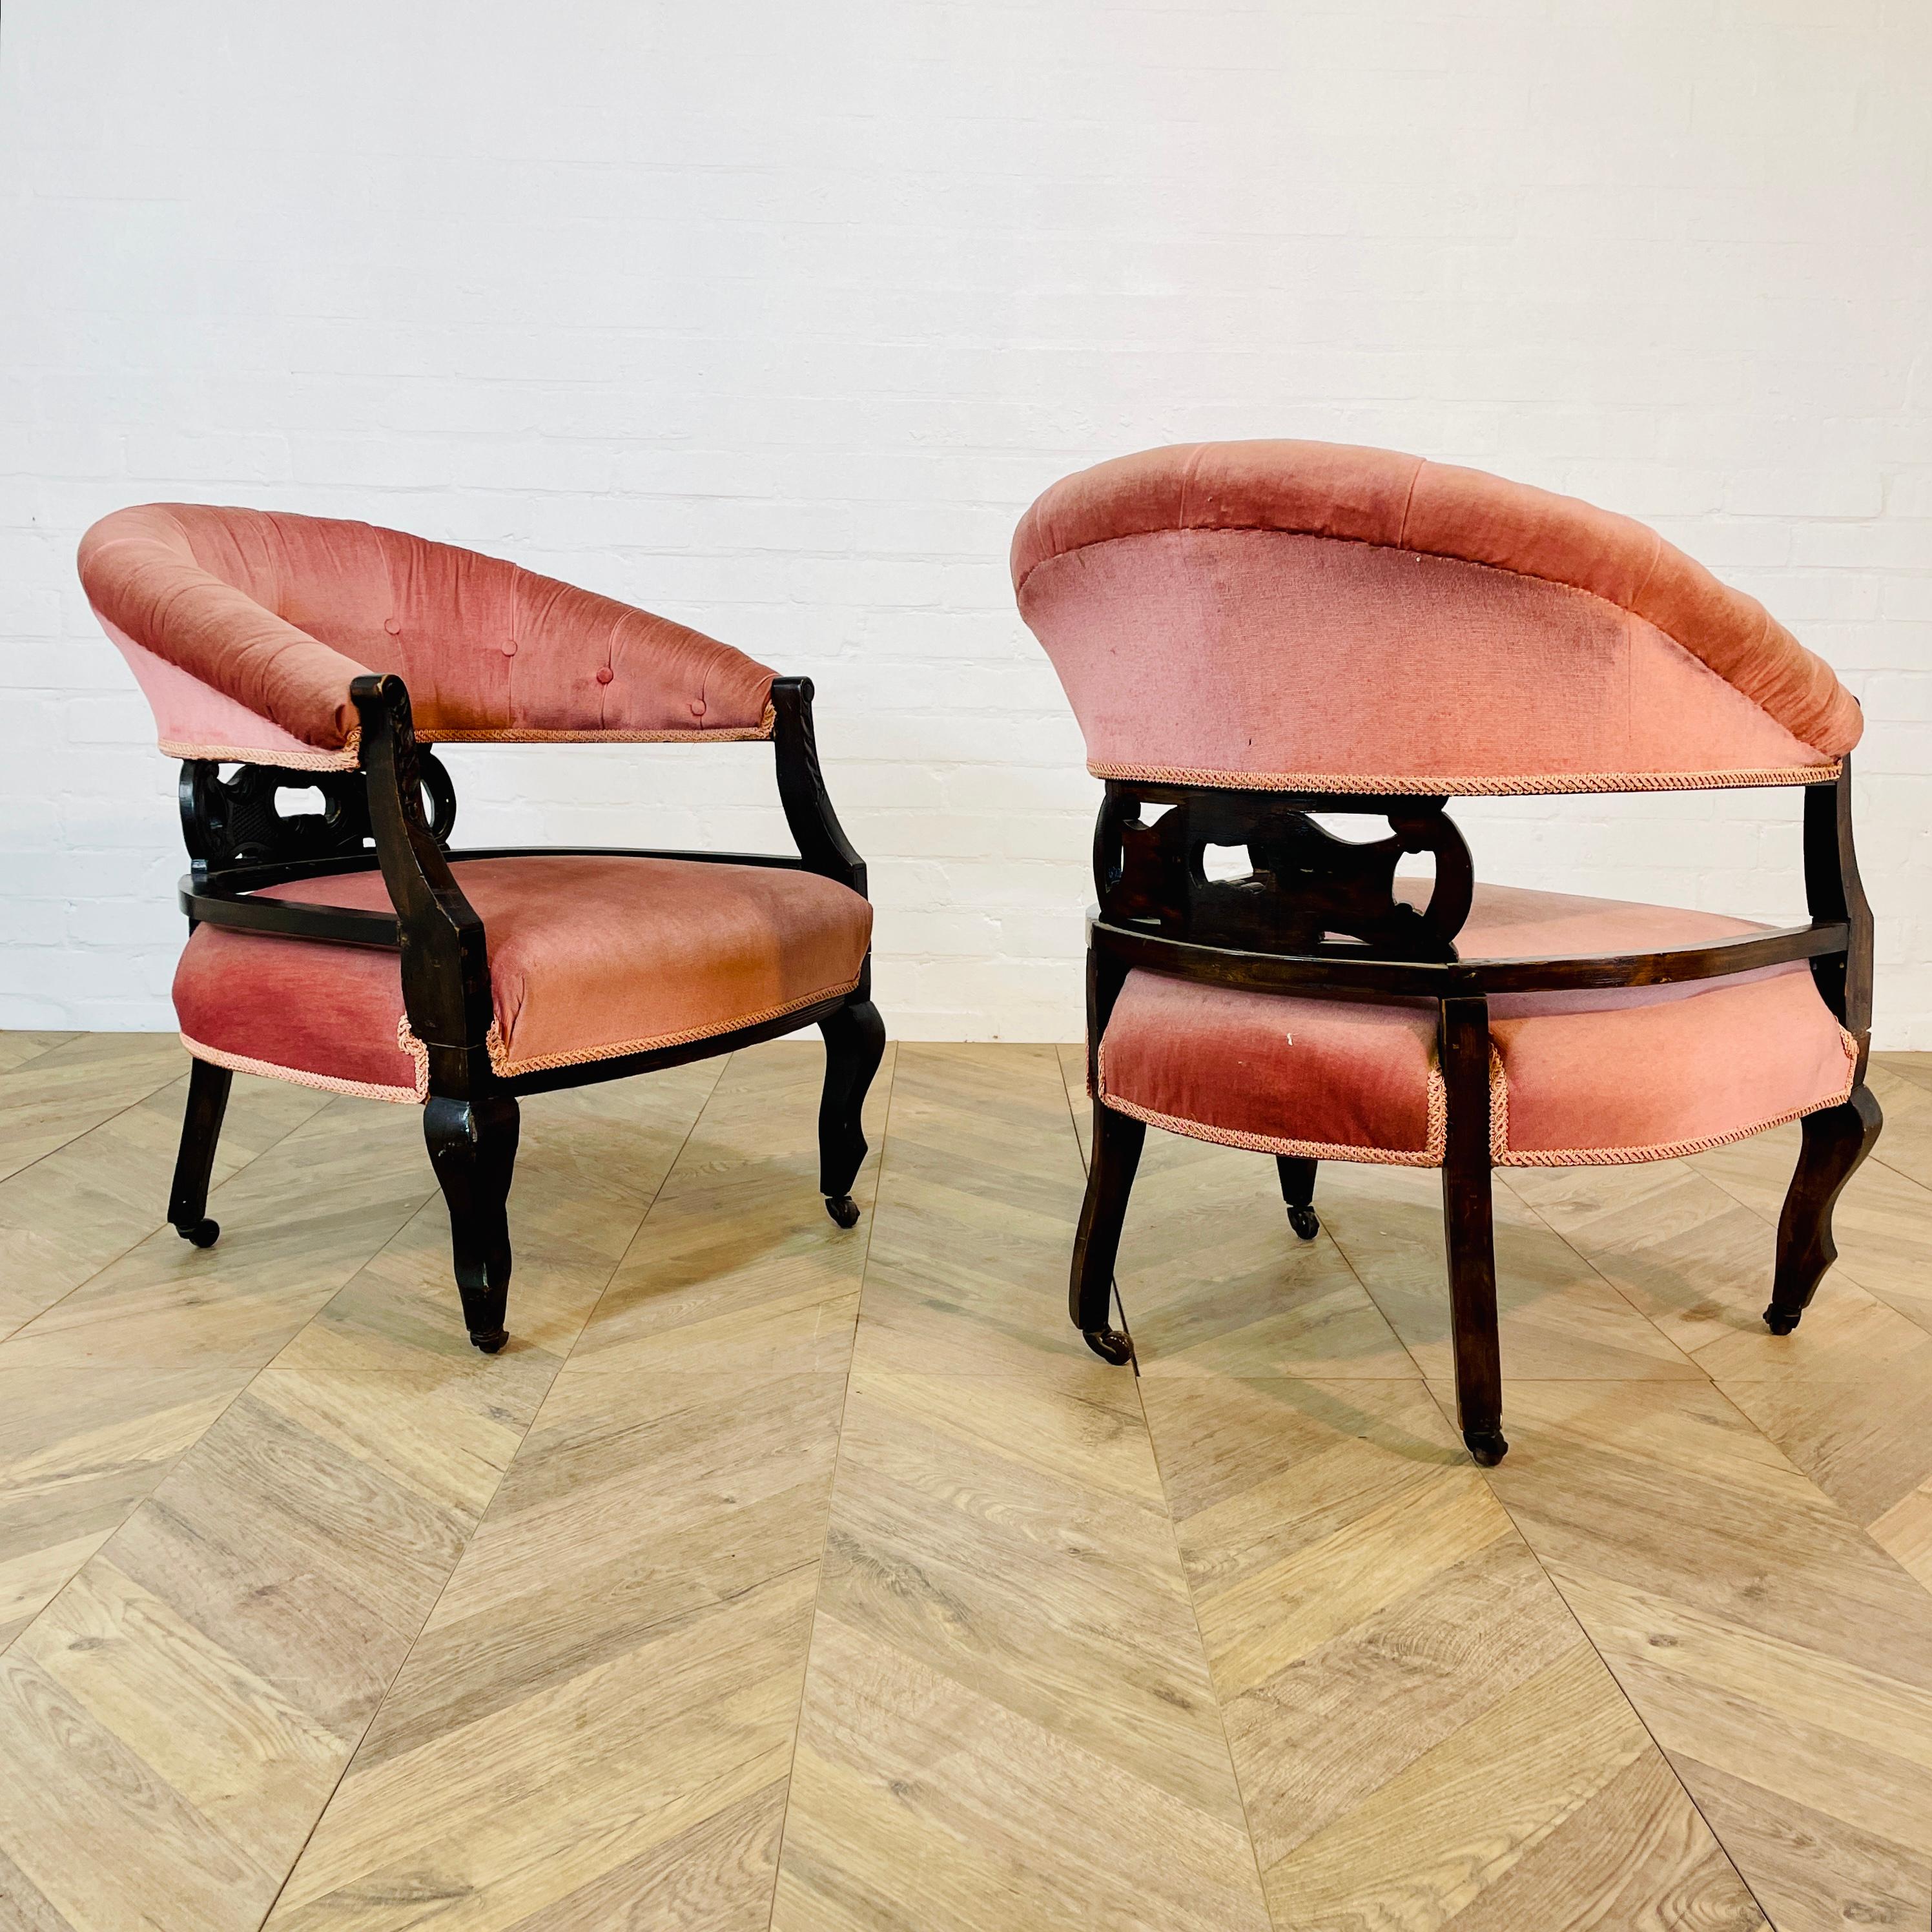 Antique English Edwardian Low Open Armchairs, Set of 2, circa 1900s In Good Condition For Sale In Ely, GB